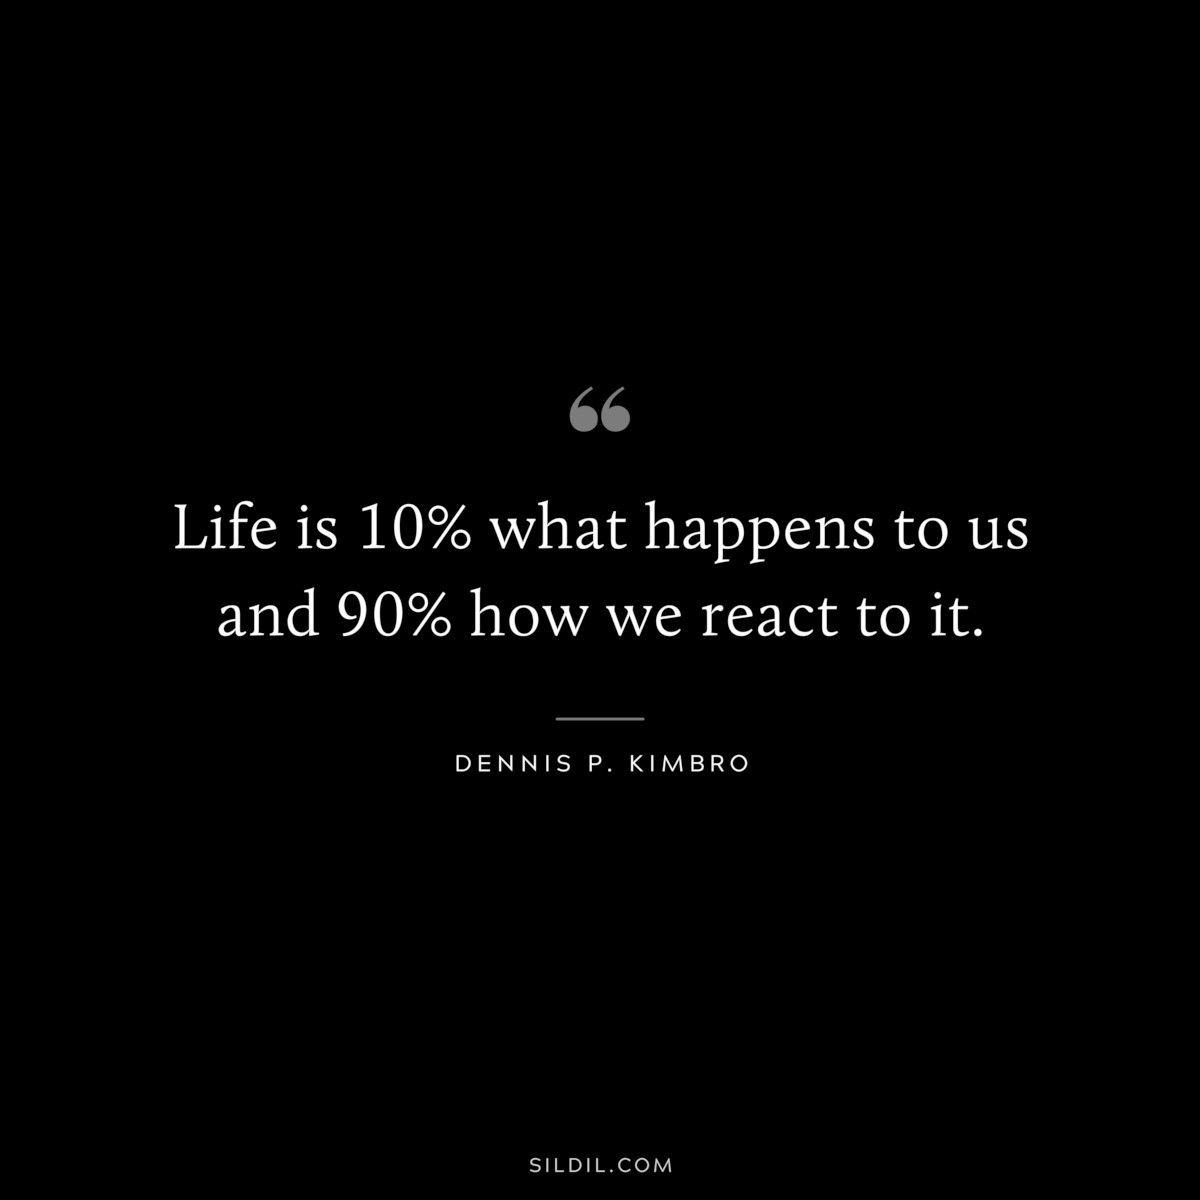 Life is 10% what happens to us and 90% how we react to it. ― Dennis P. Kimbro